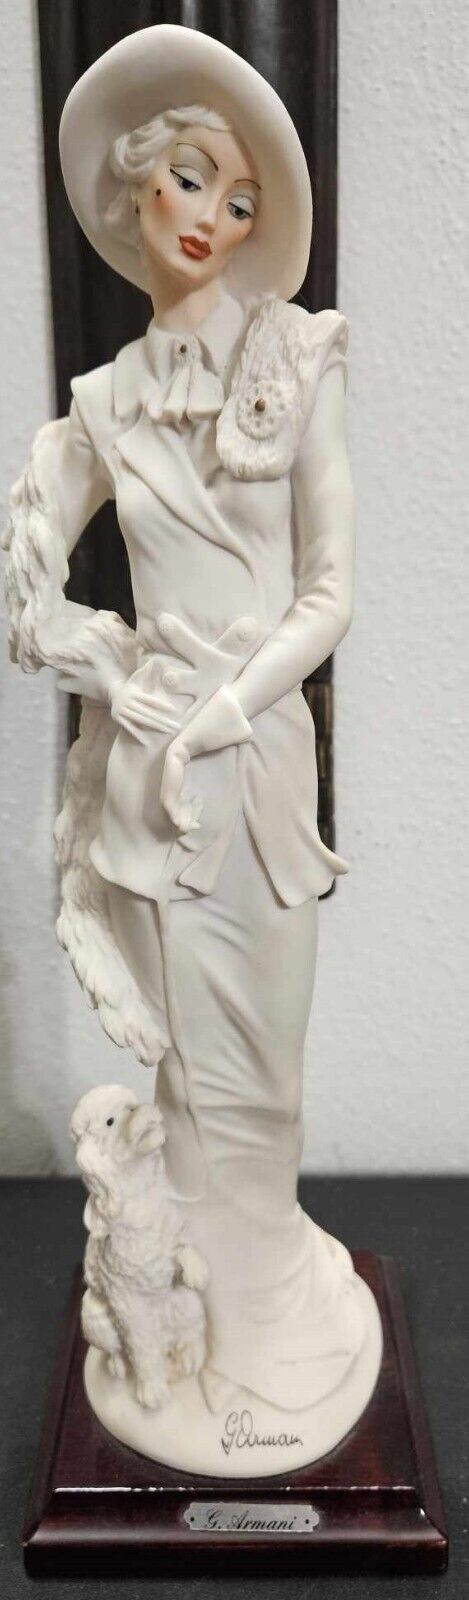 Giuseppe Armani “Lady with Poodle” Statue Florence Italy 1987